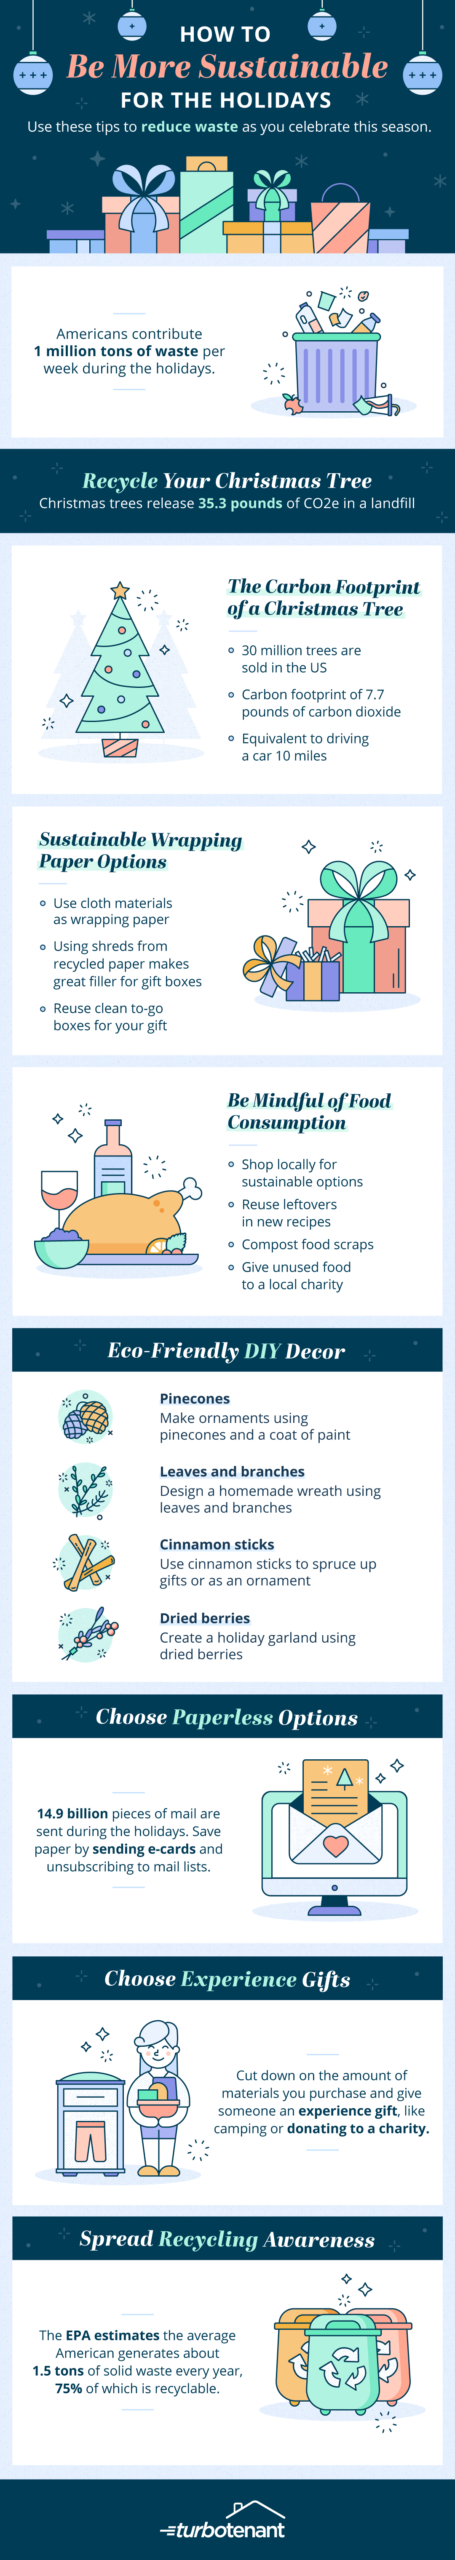 reduce waste during the holidays infographic